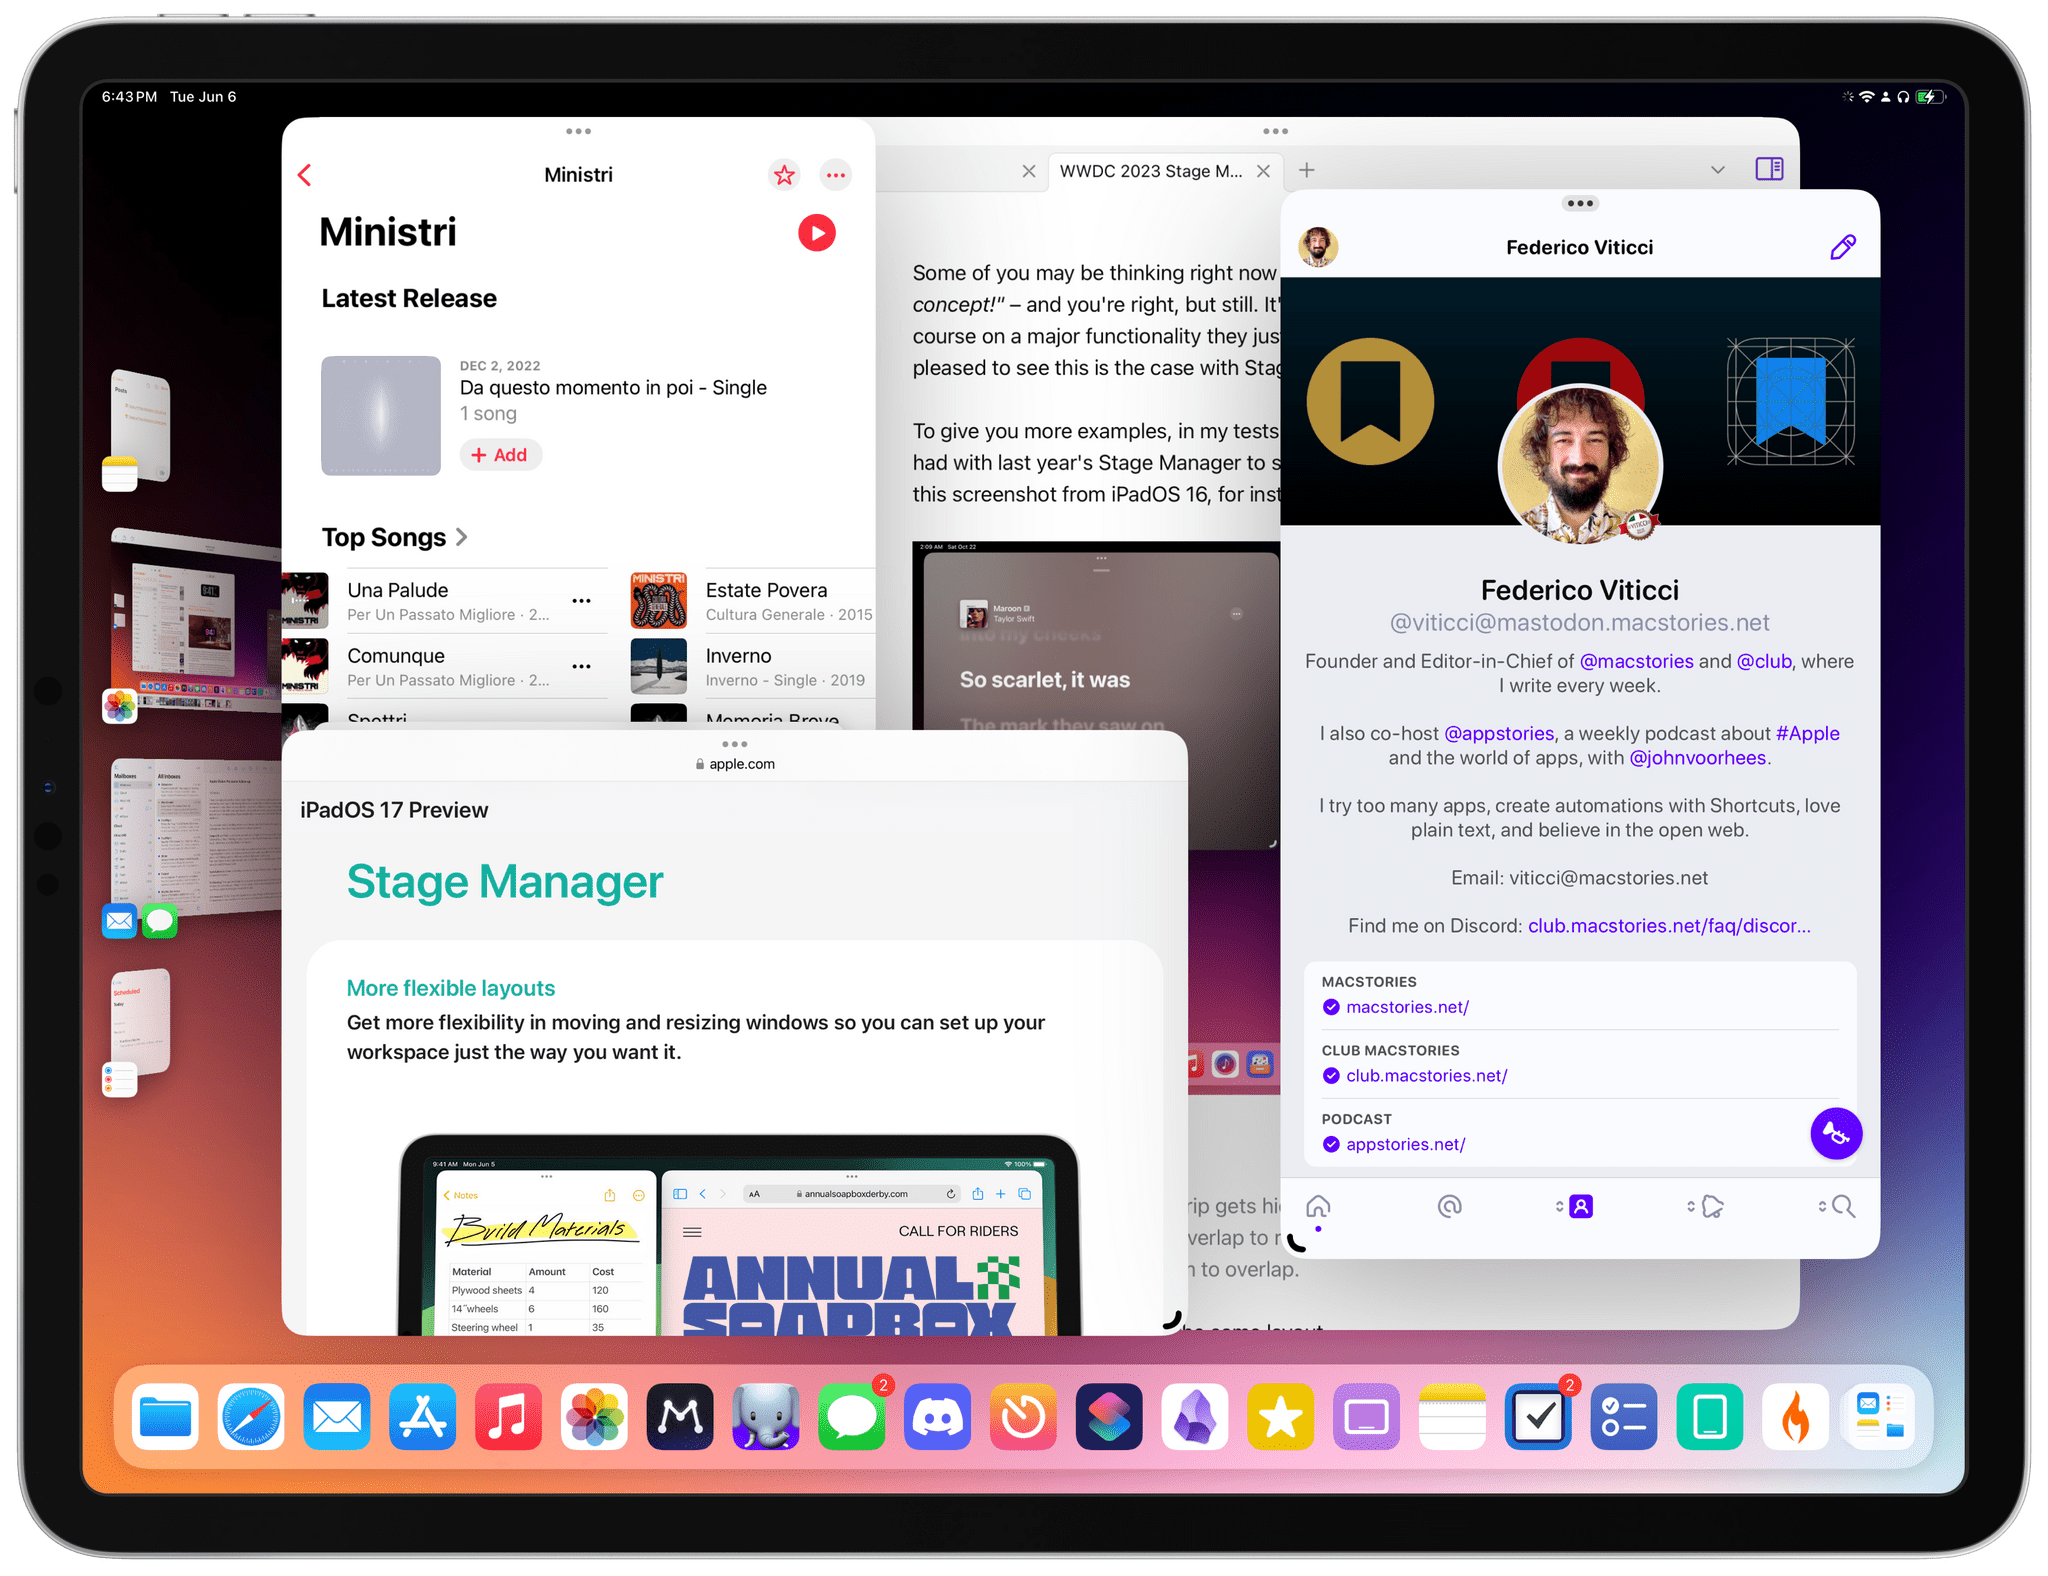 Stage Manager in iPadOS 17 can be an overlapping fest, if you want to.